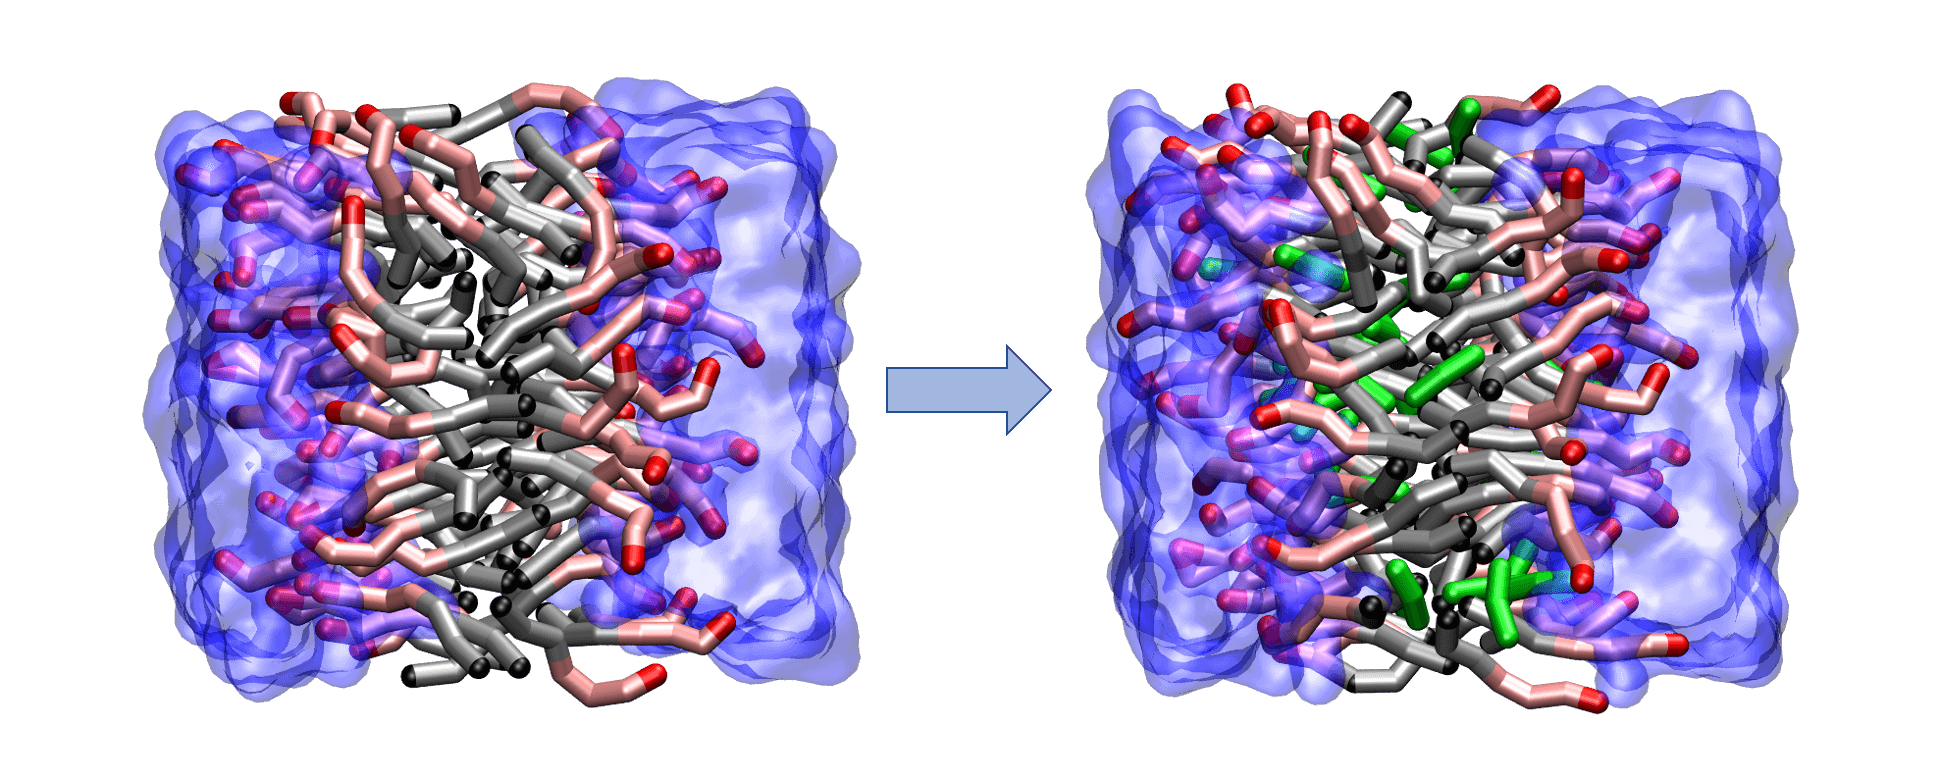 A triethylene glycol mono-n-decyl ether (C10E3) bilayer in water before (left) and after (right) simulated loading of 1-hexanol molecules (shown in green).